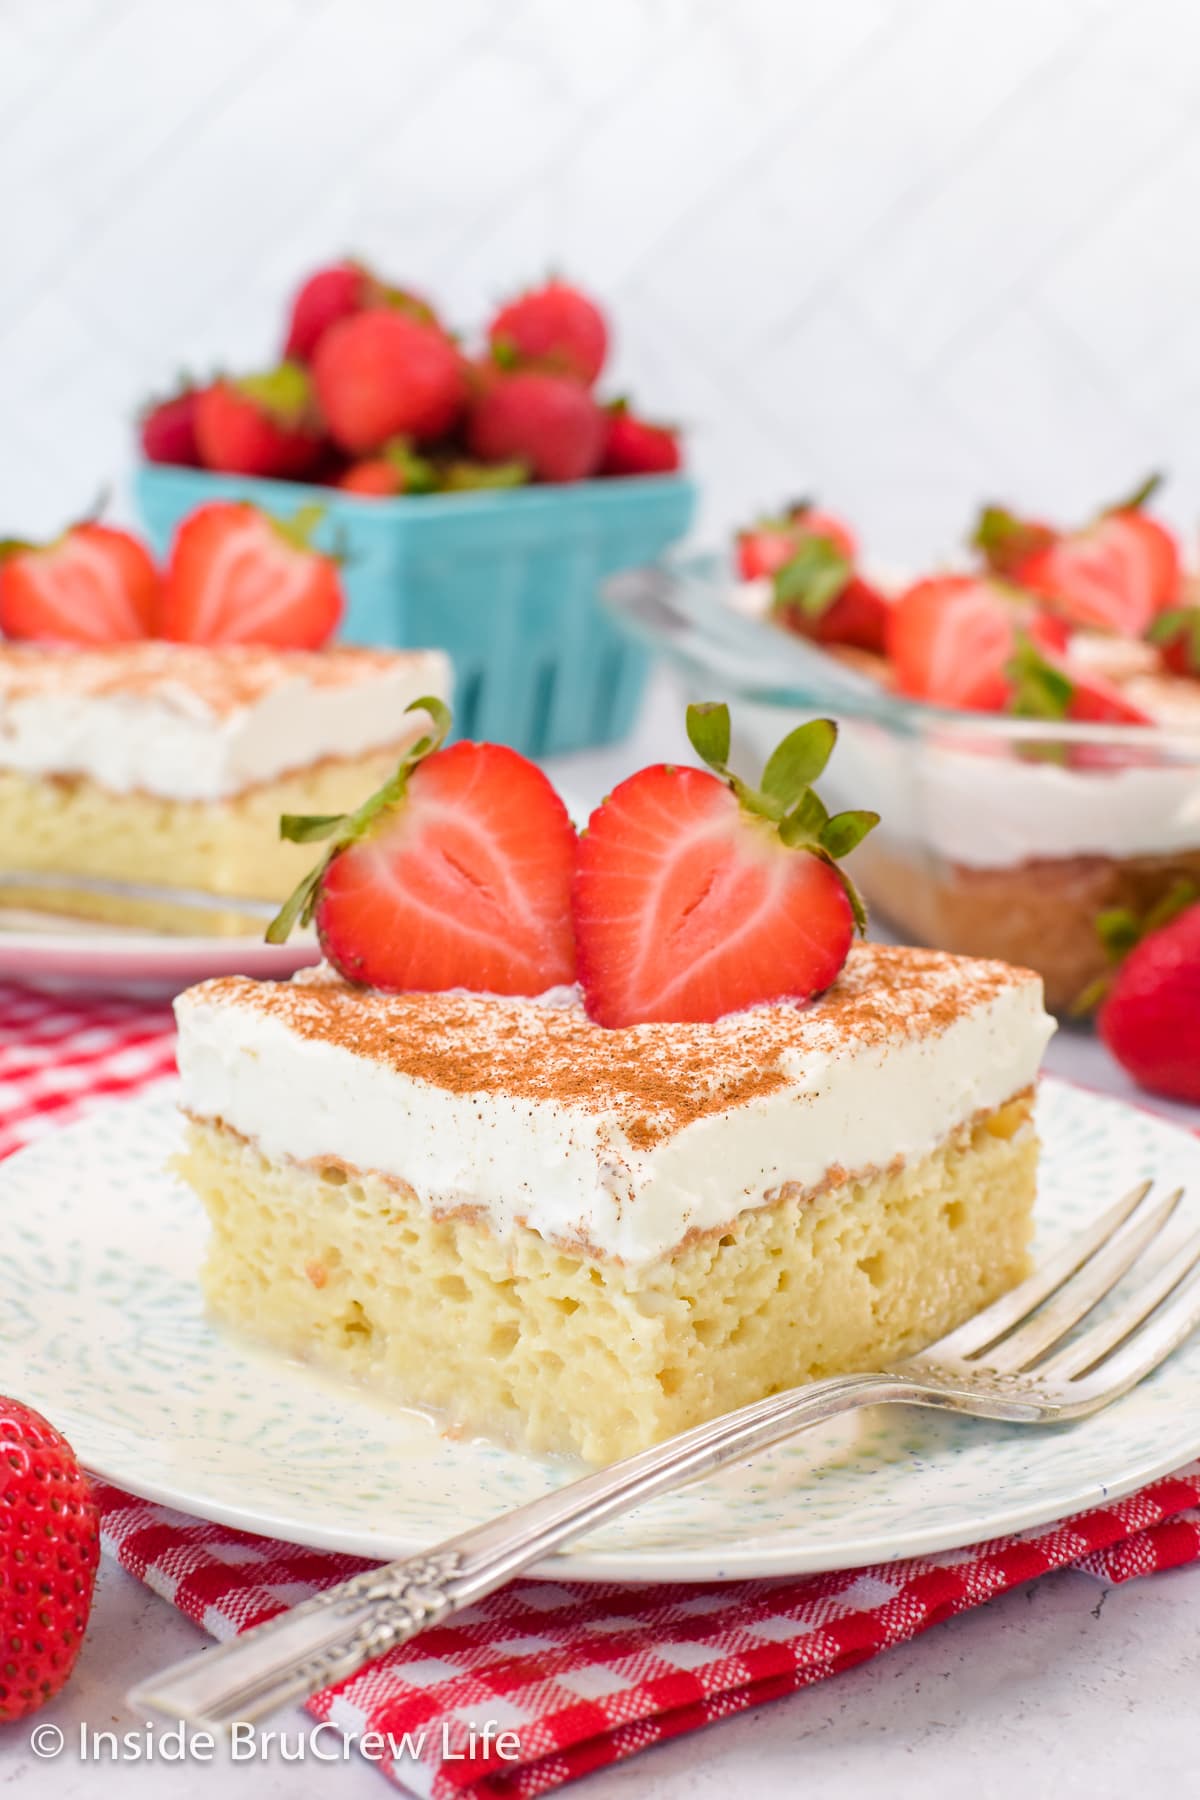 A slice of tres leches cake with strawberries on a white plate.